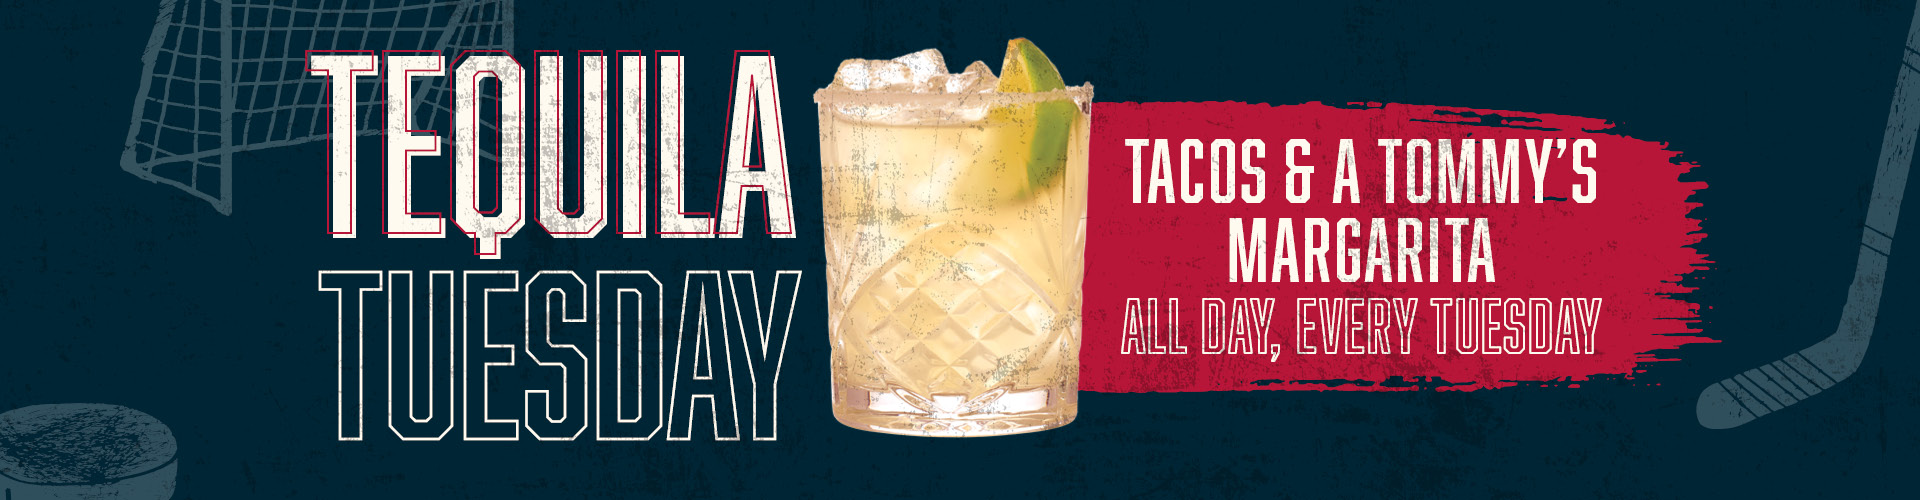 Tequila Tuesdays - Tacos & a Tommy's Margarita - All day, every Tuesday